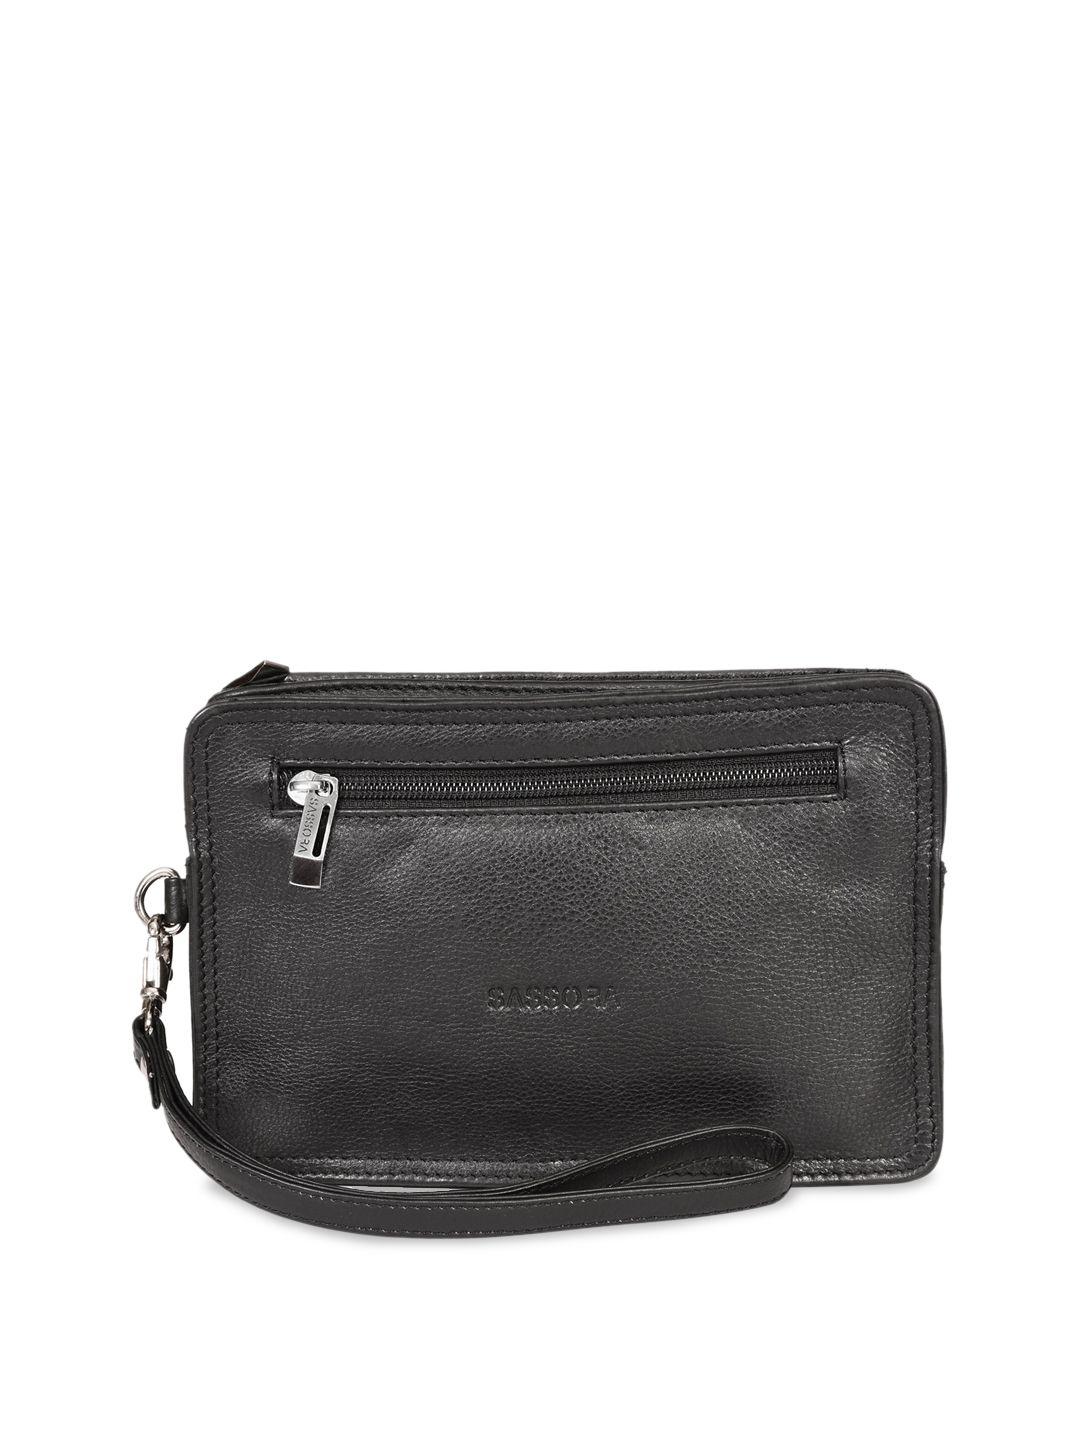 sassora black solid leather travel pouch